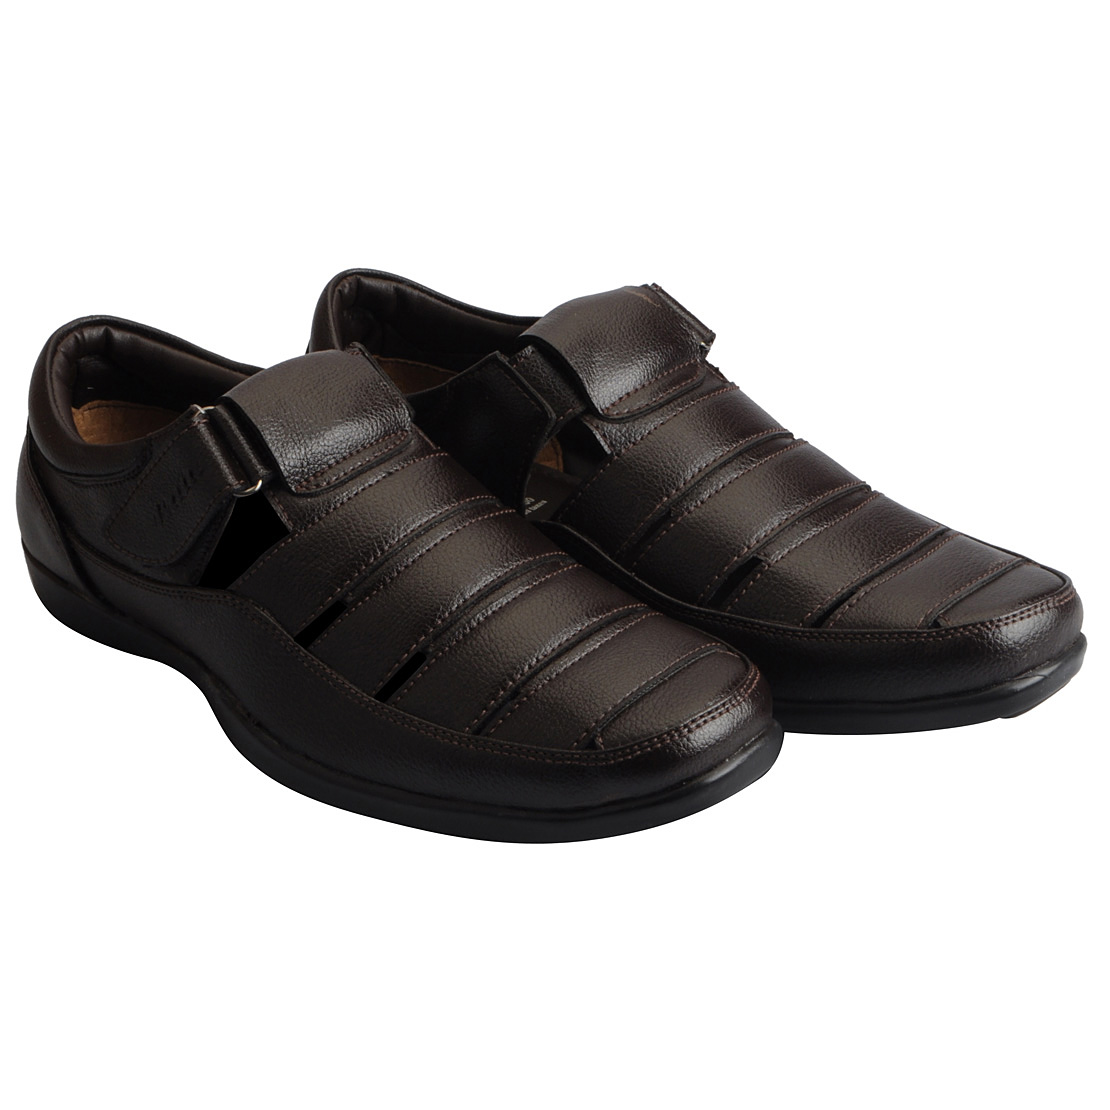 Buy Bata Mens Outdoor Floaters And Sandals Online @ ₹999 from ShopClues